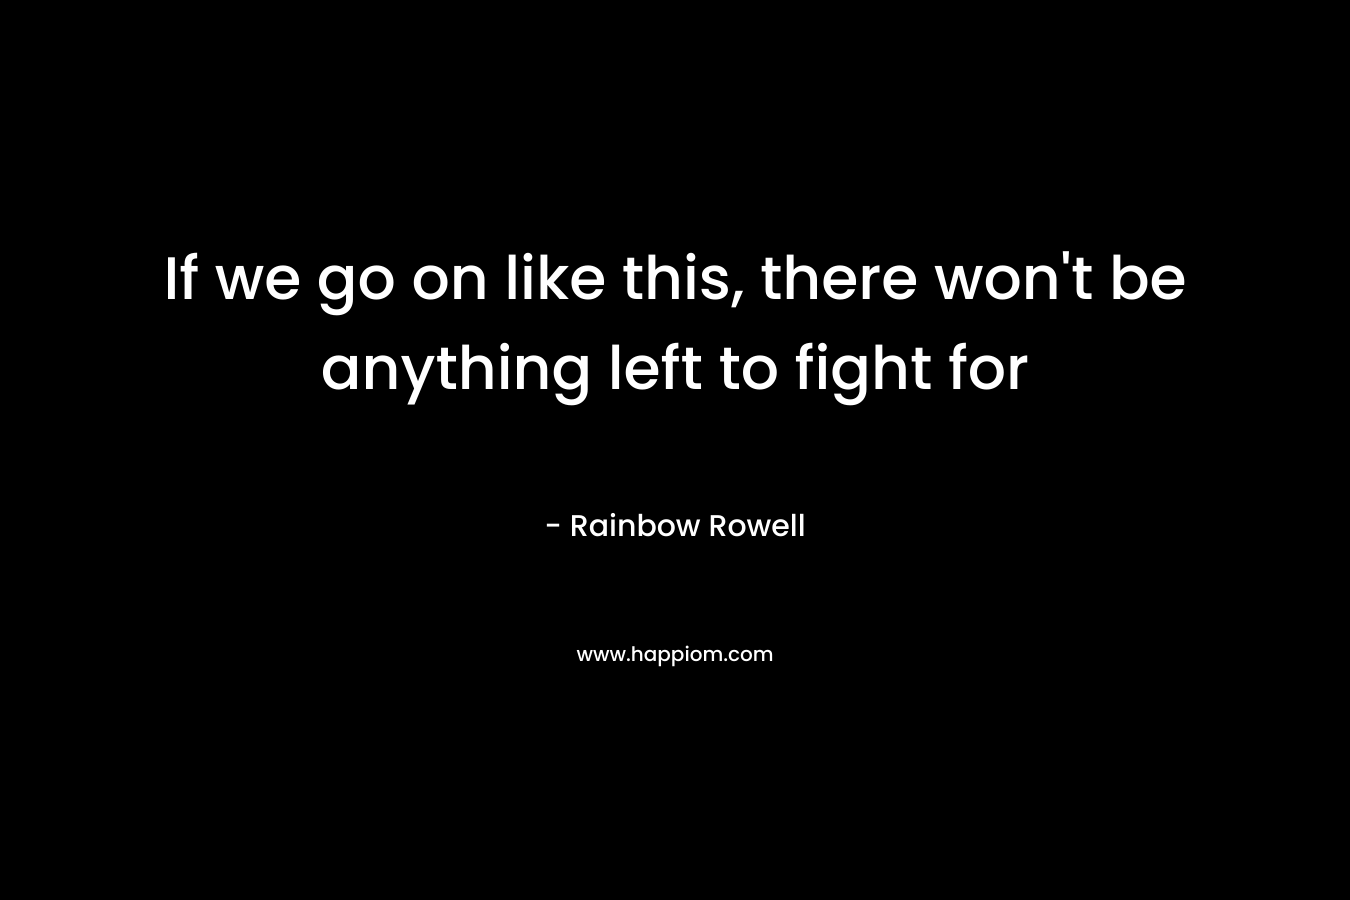 If we go on like this, there won’t be anything left to fight for – Rainbow Rowell